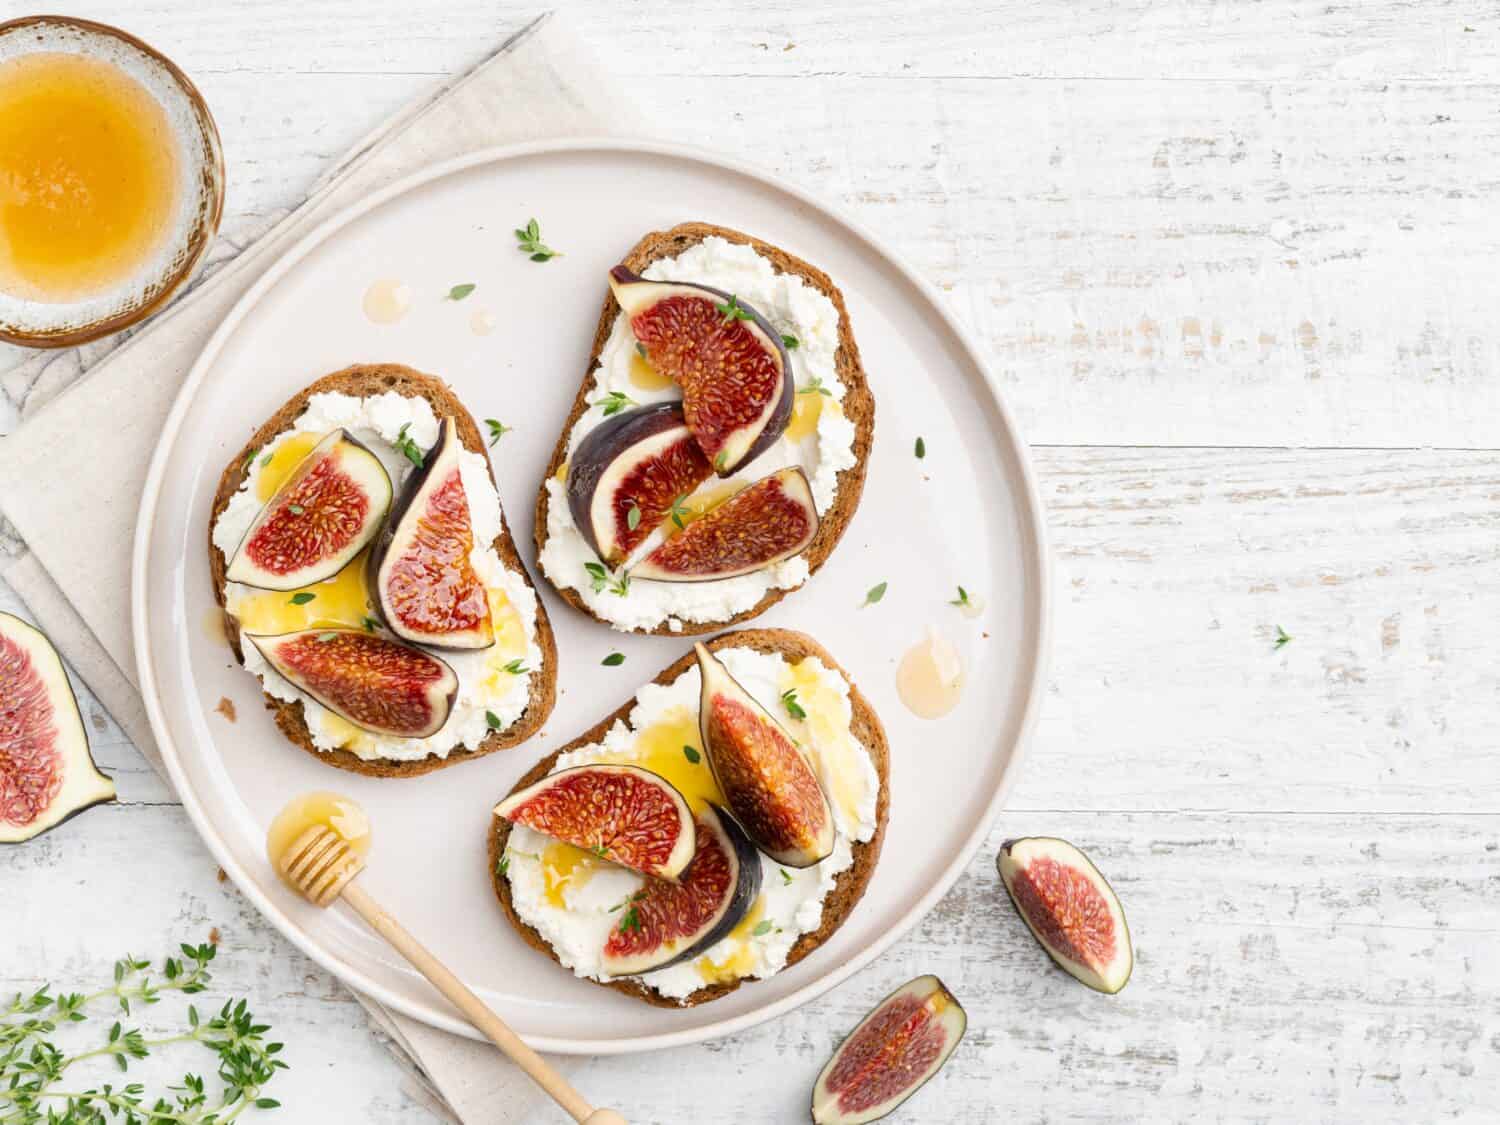 Ricotta, figs and honey bruschetta. Open sandwiches (toasts) with cream cheese, fresh sliced figs, syrup and thyme leaves. Tasty morning breakfast, lunch or dessert. Healthy eating concept. Top view.